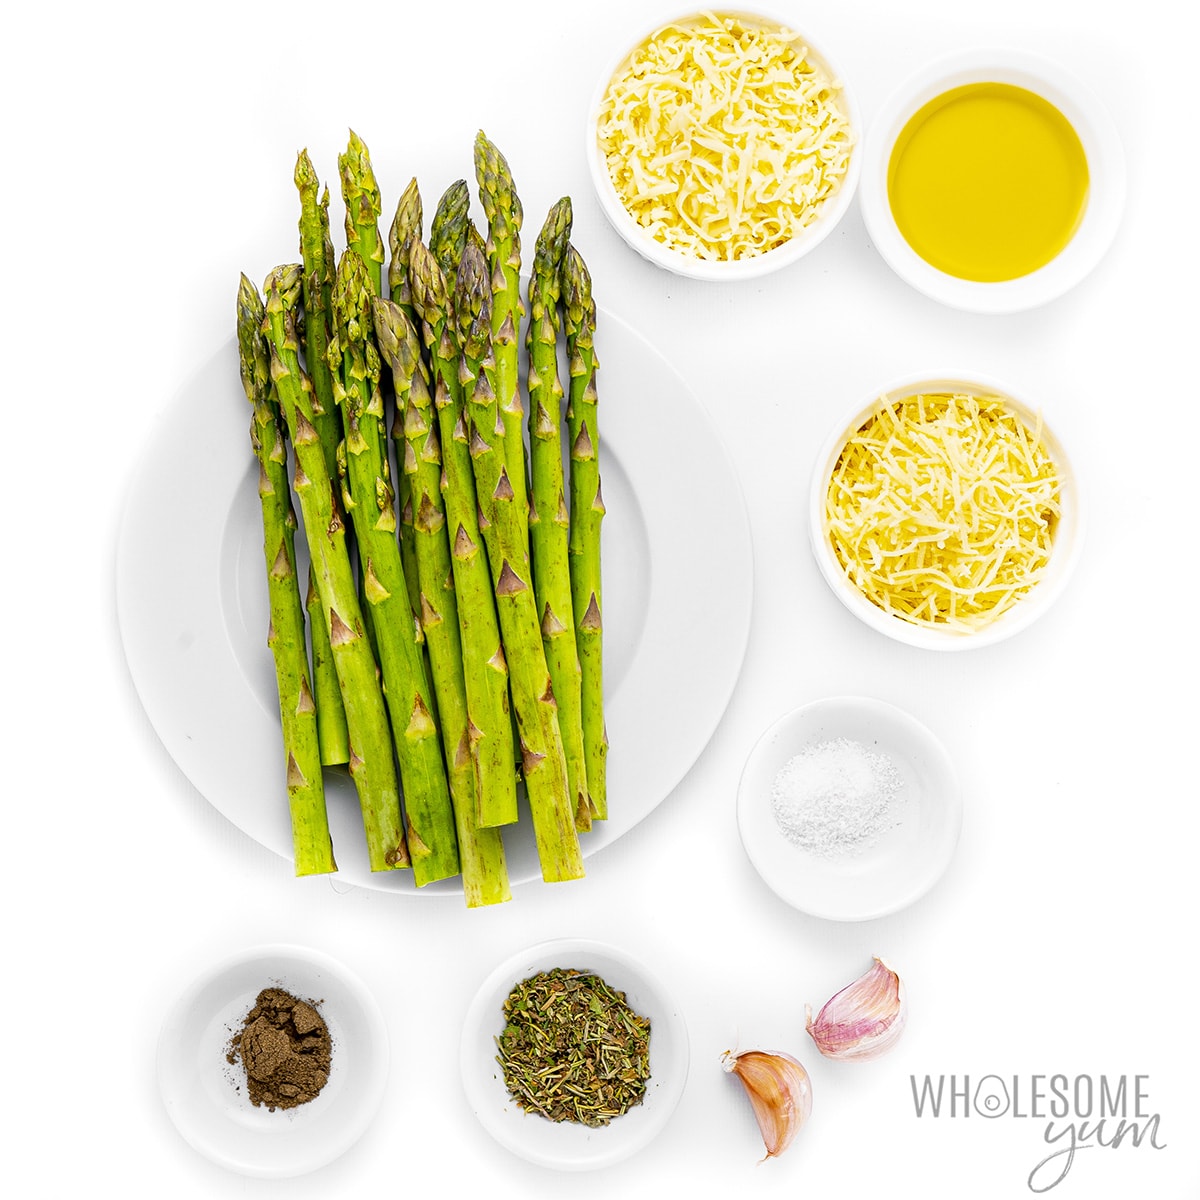 Cheesy asparagus recipe ingredients.